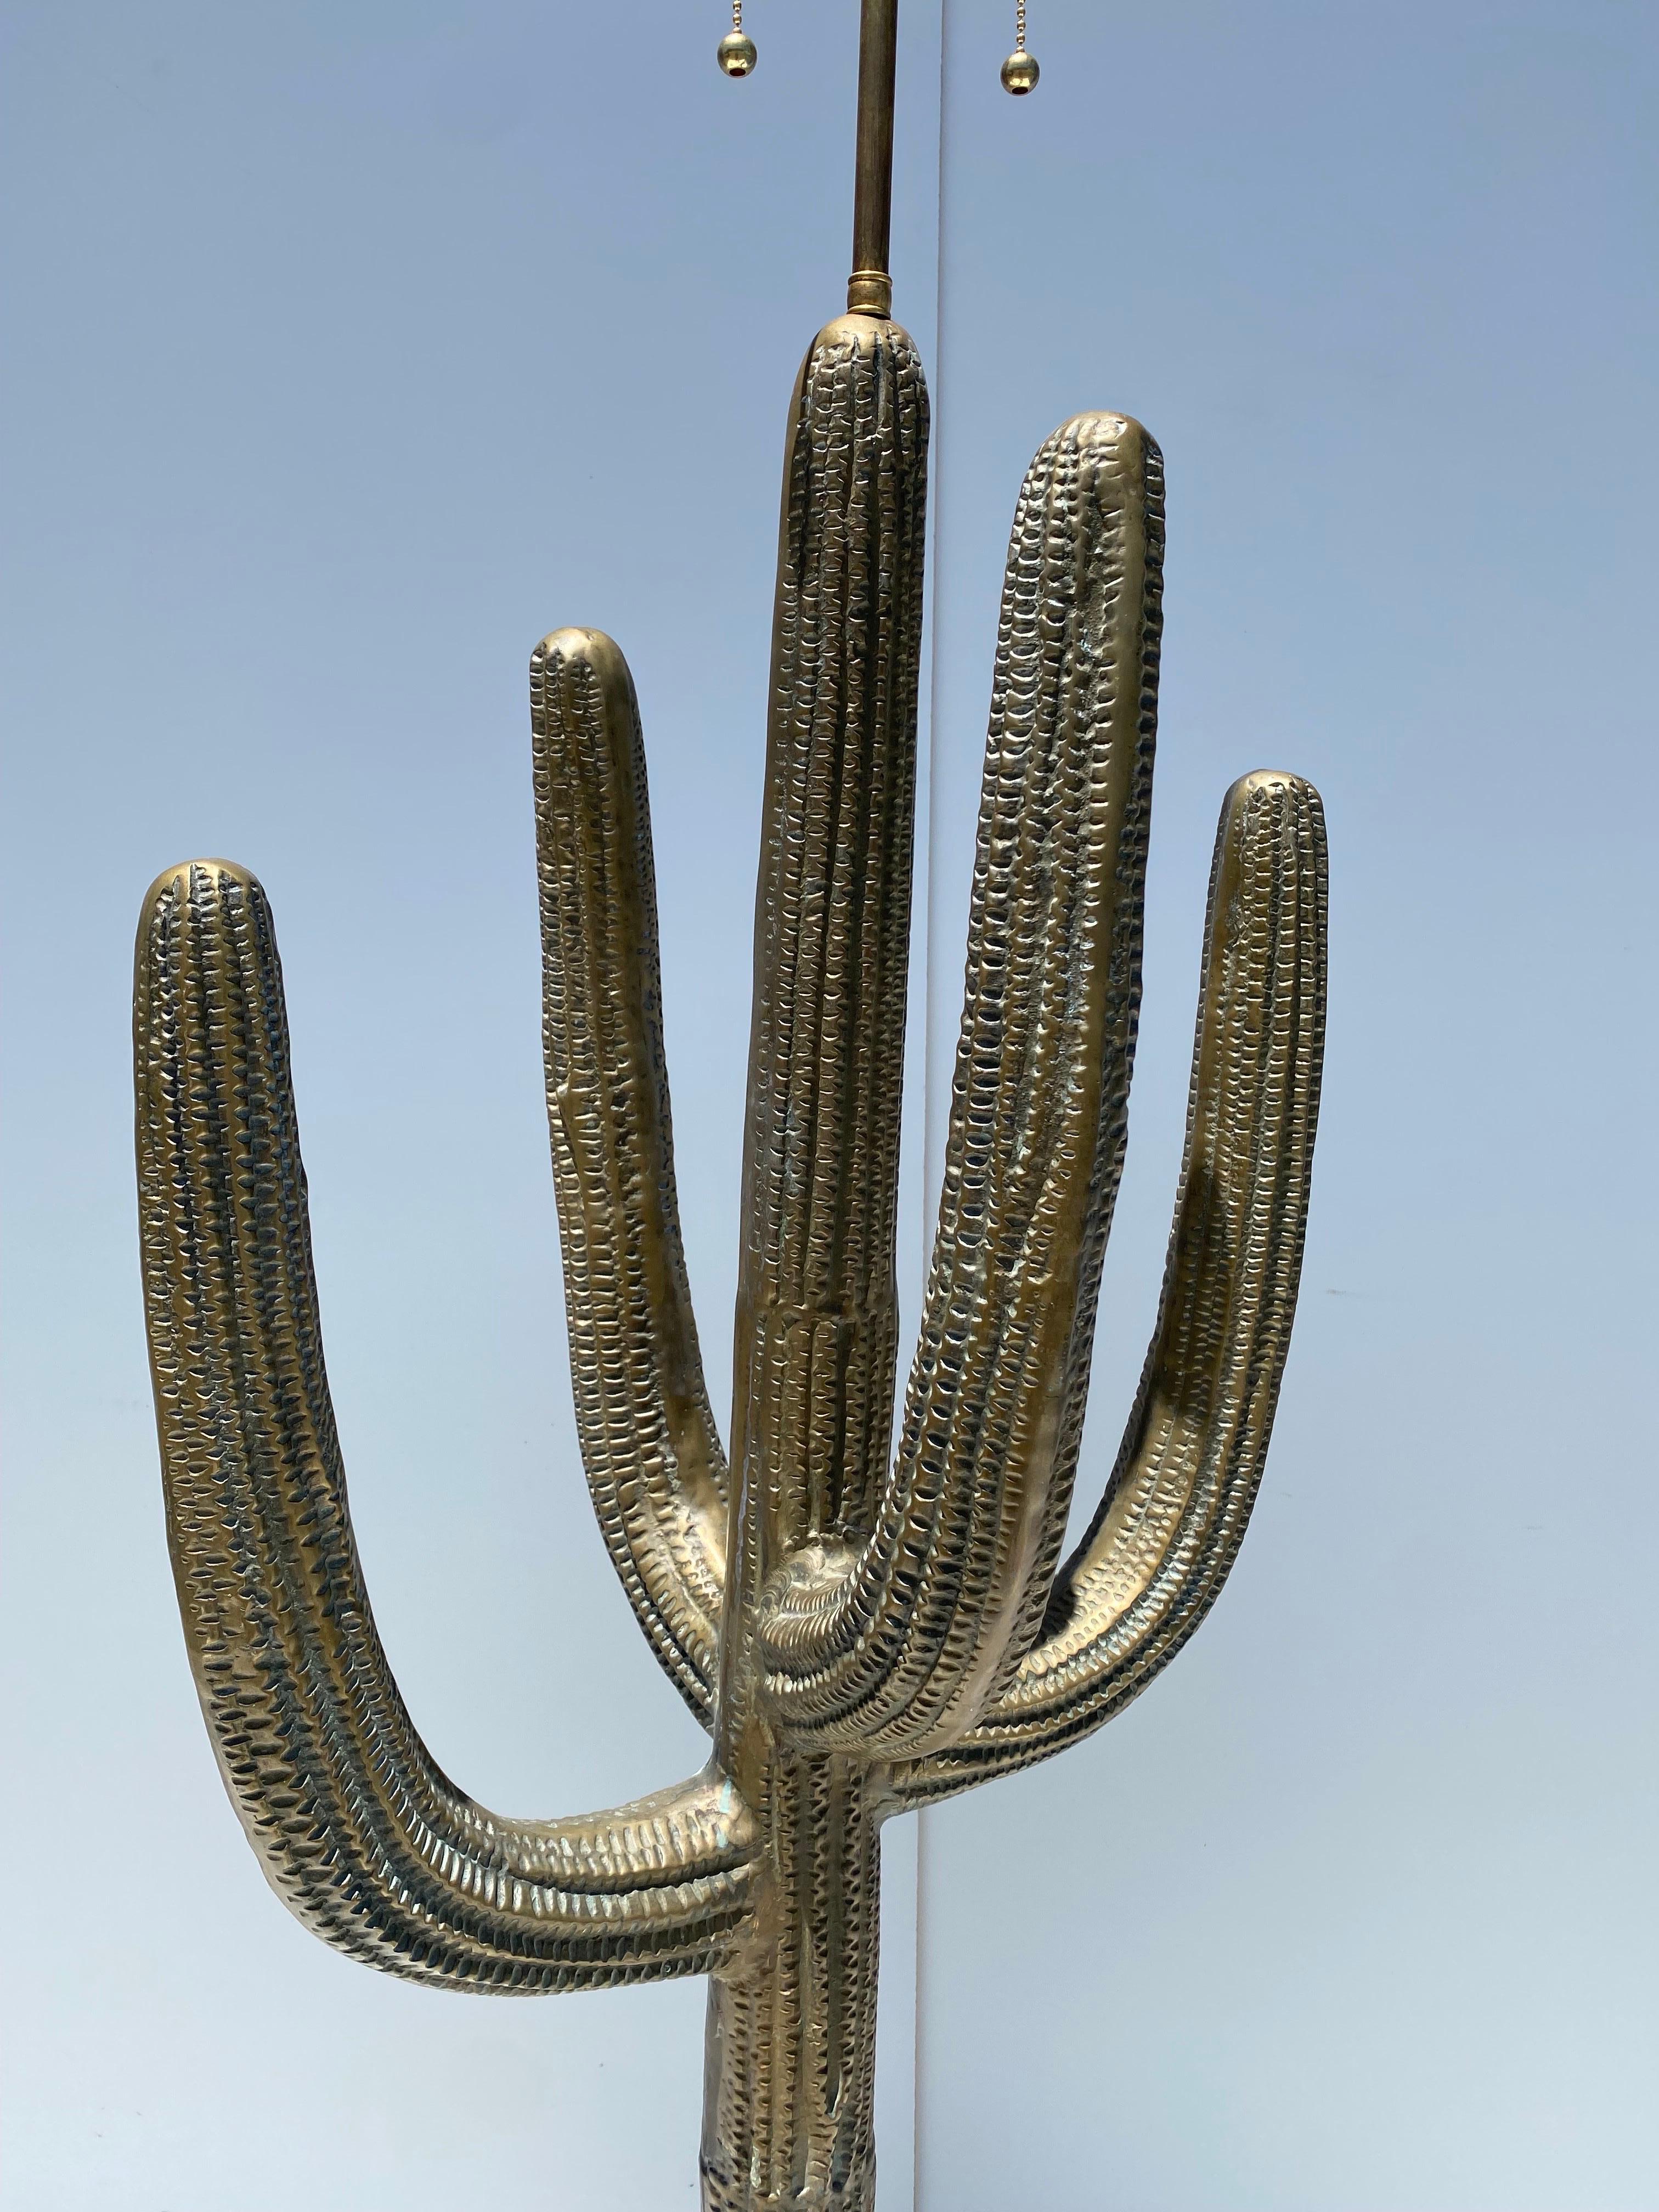 Brass Saguaro cactus sculpture/floor lamp. South Western or desert Mid Century Modern decor. Requires two up to 60watt bulbs. Only cactus is 45” tall.